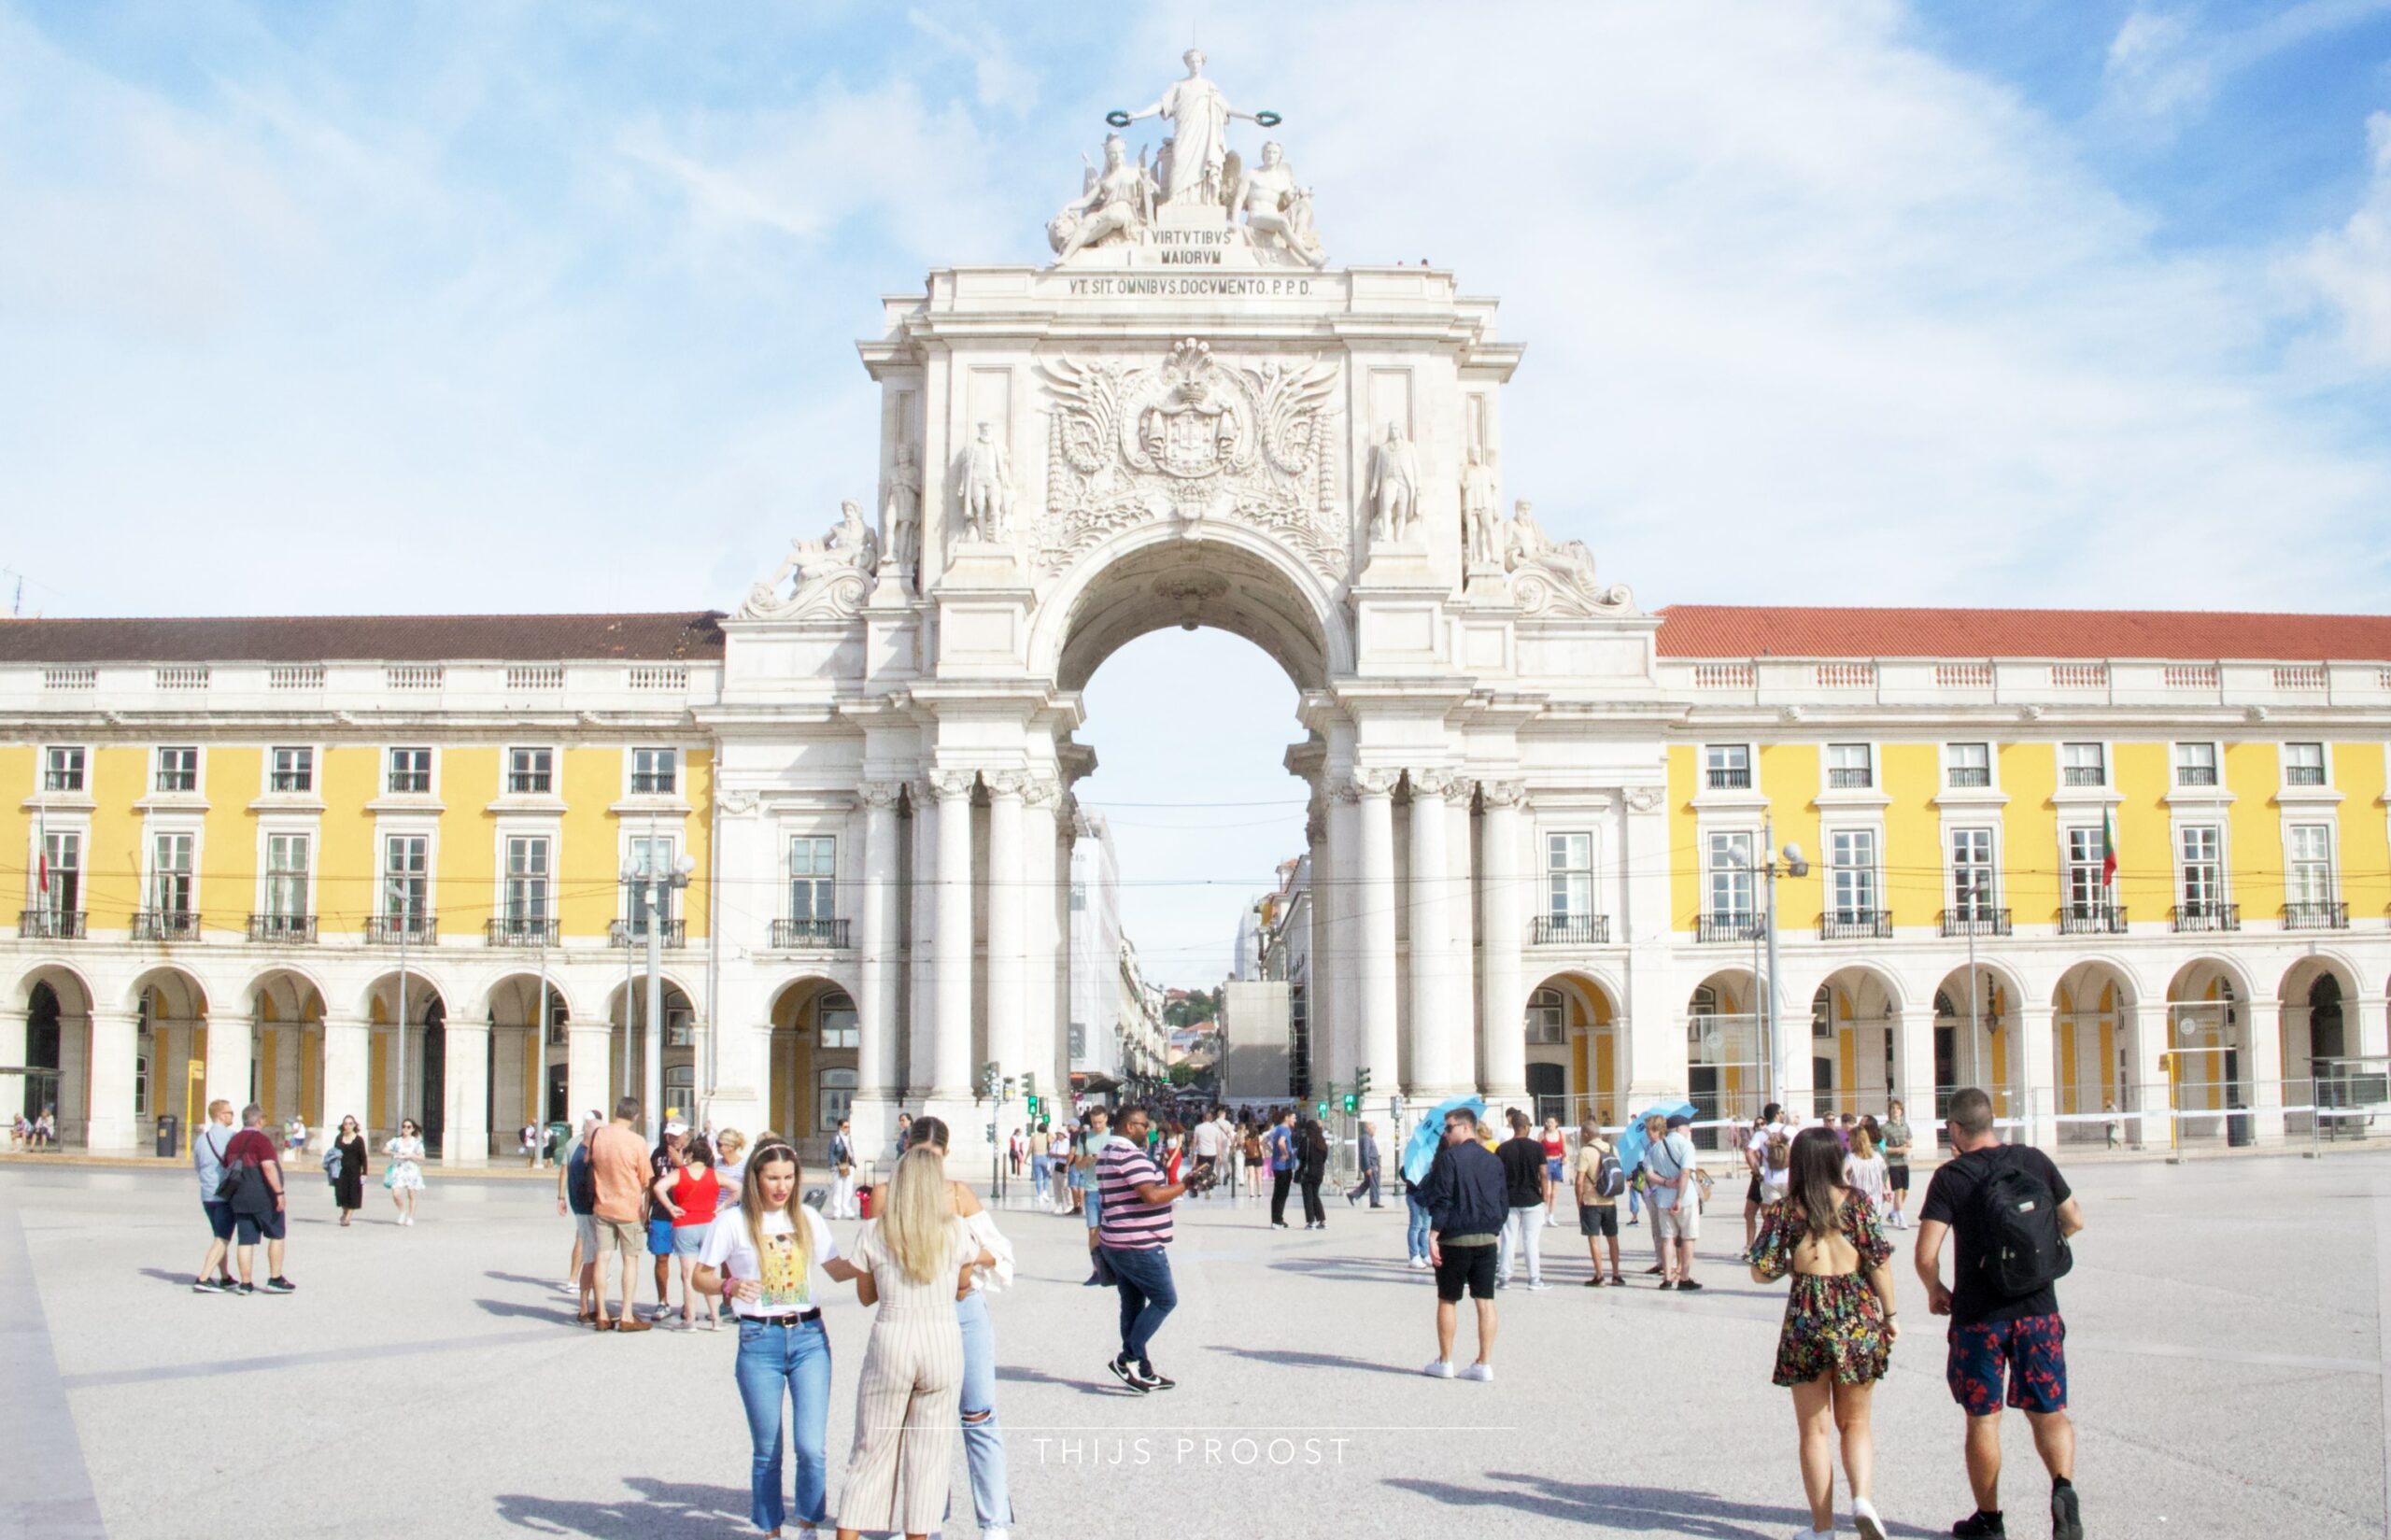 A view of the main entrance of Praça do Comércio in Lisbon Portugal on a clear day. Tourist are standing arround.